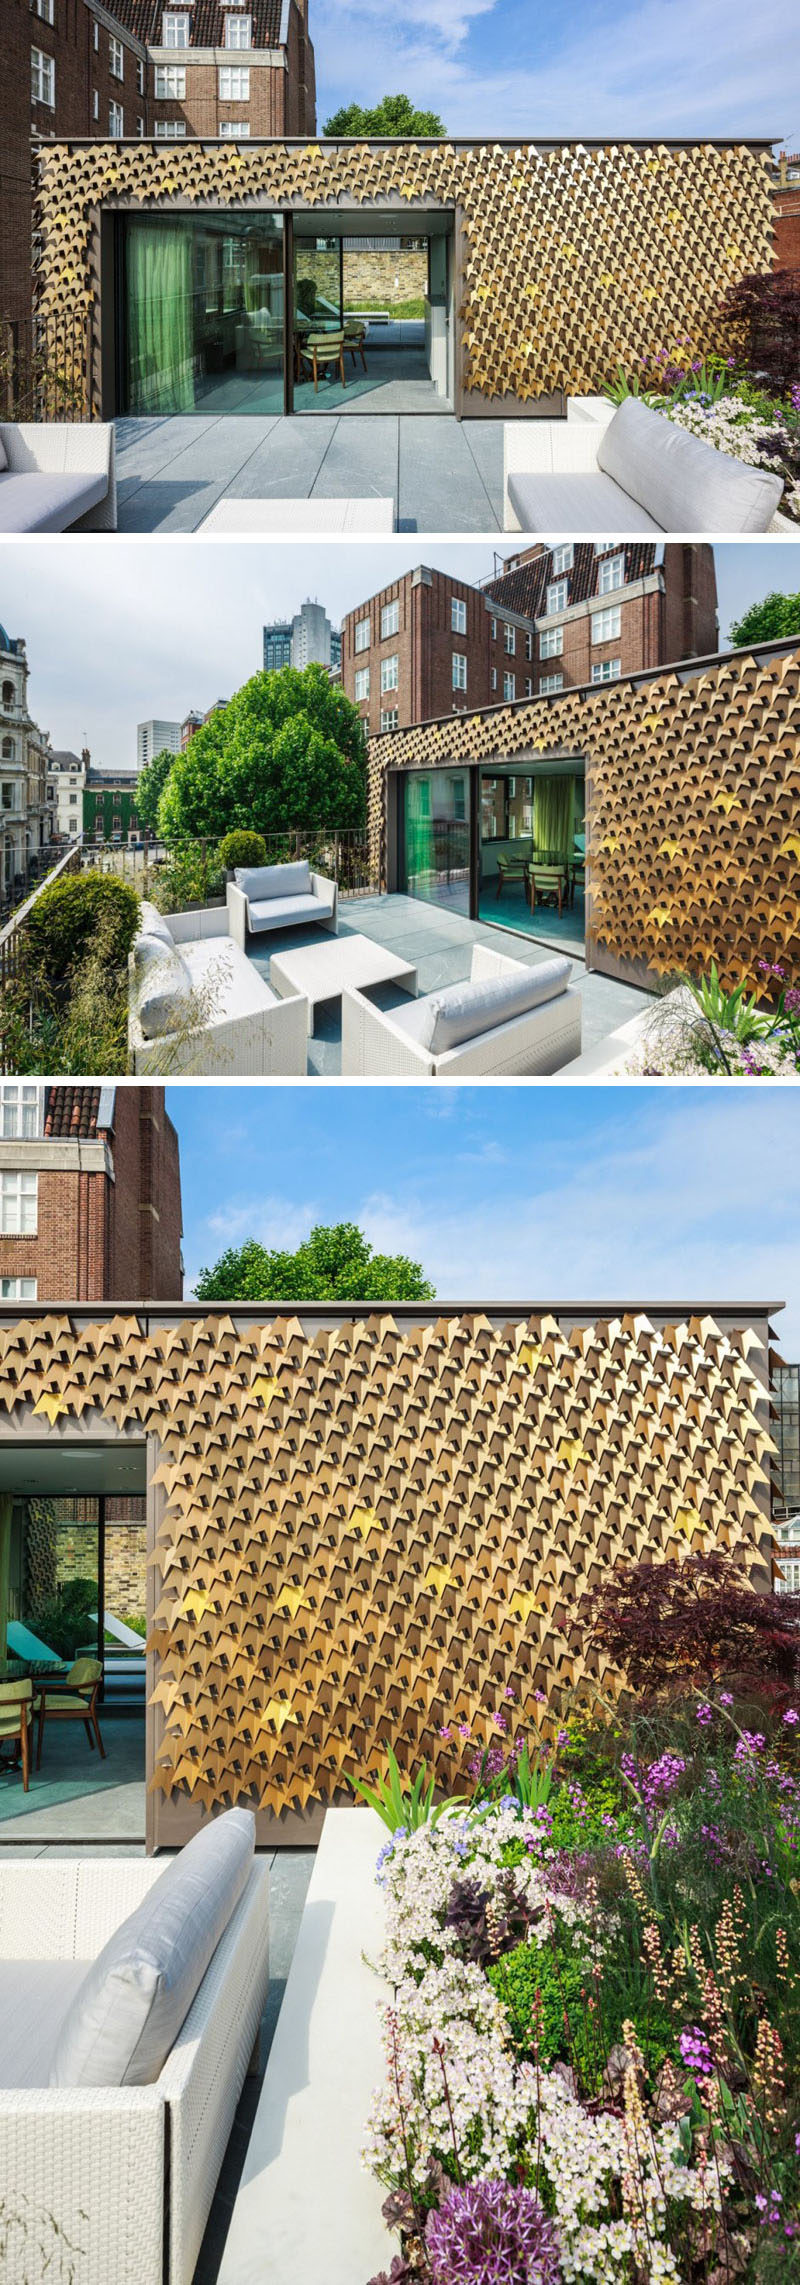 4080 folded aluminum leaves cover the facade of this home in London.